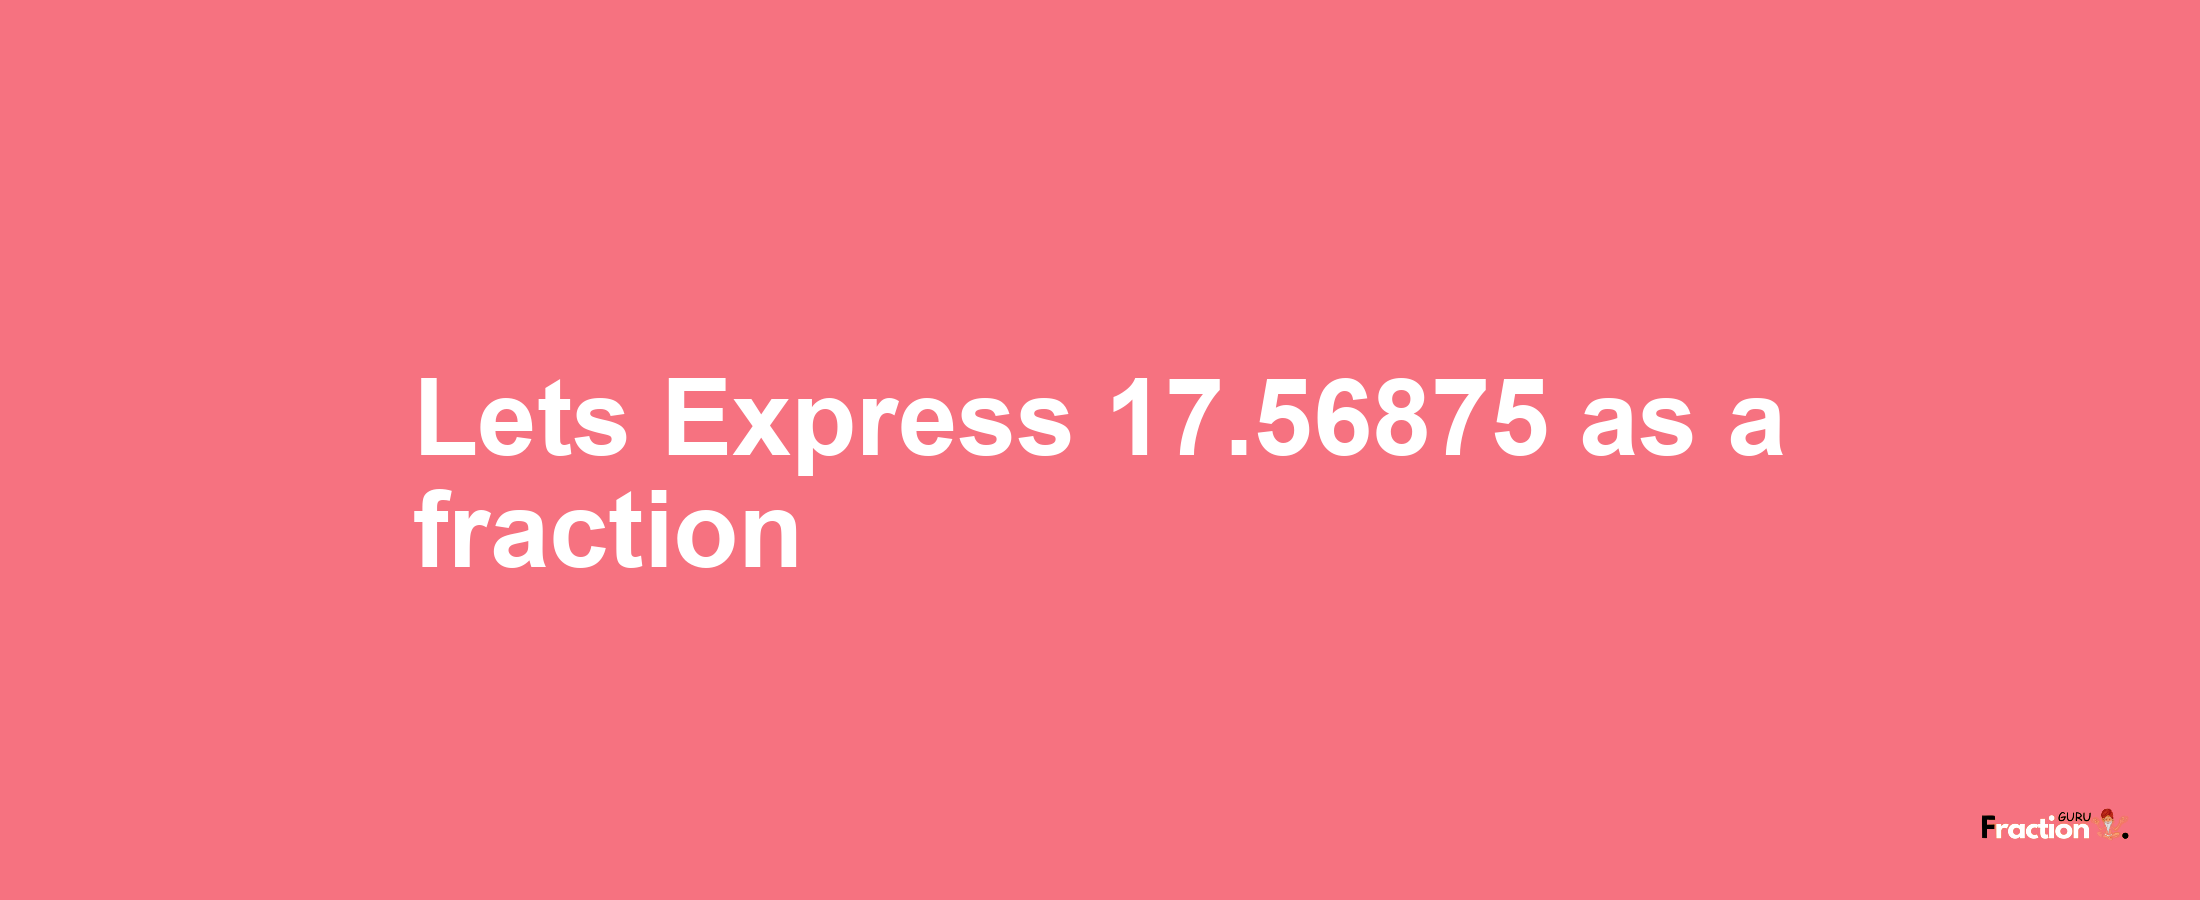 Lets Express 17.56875 as afraction